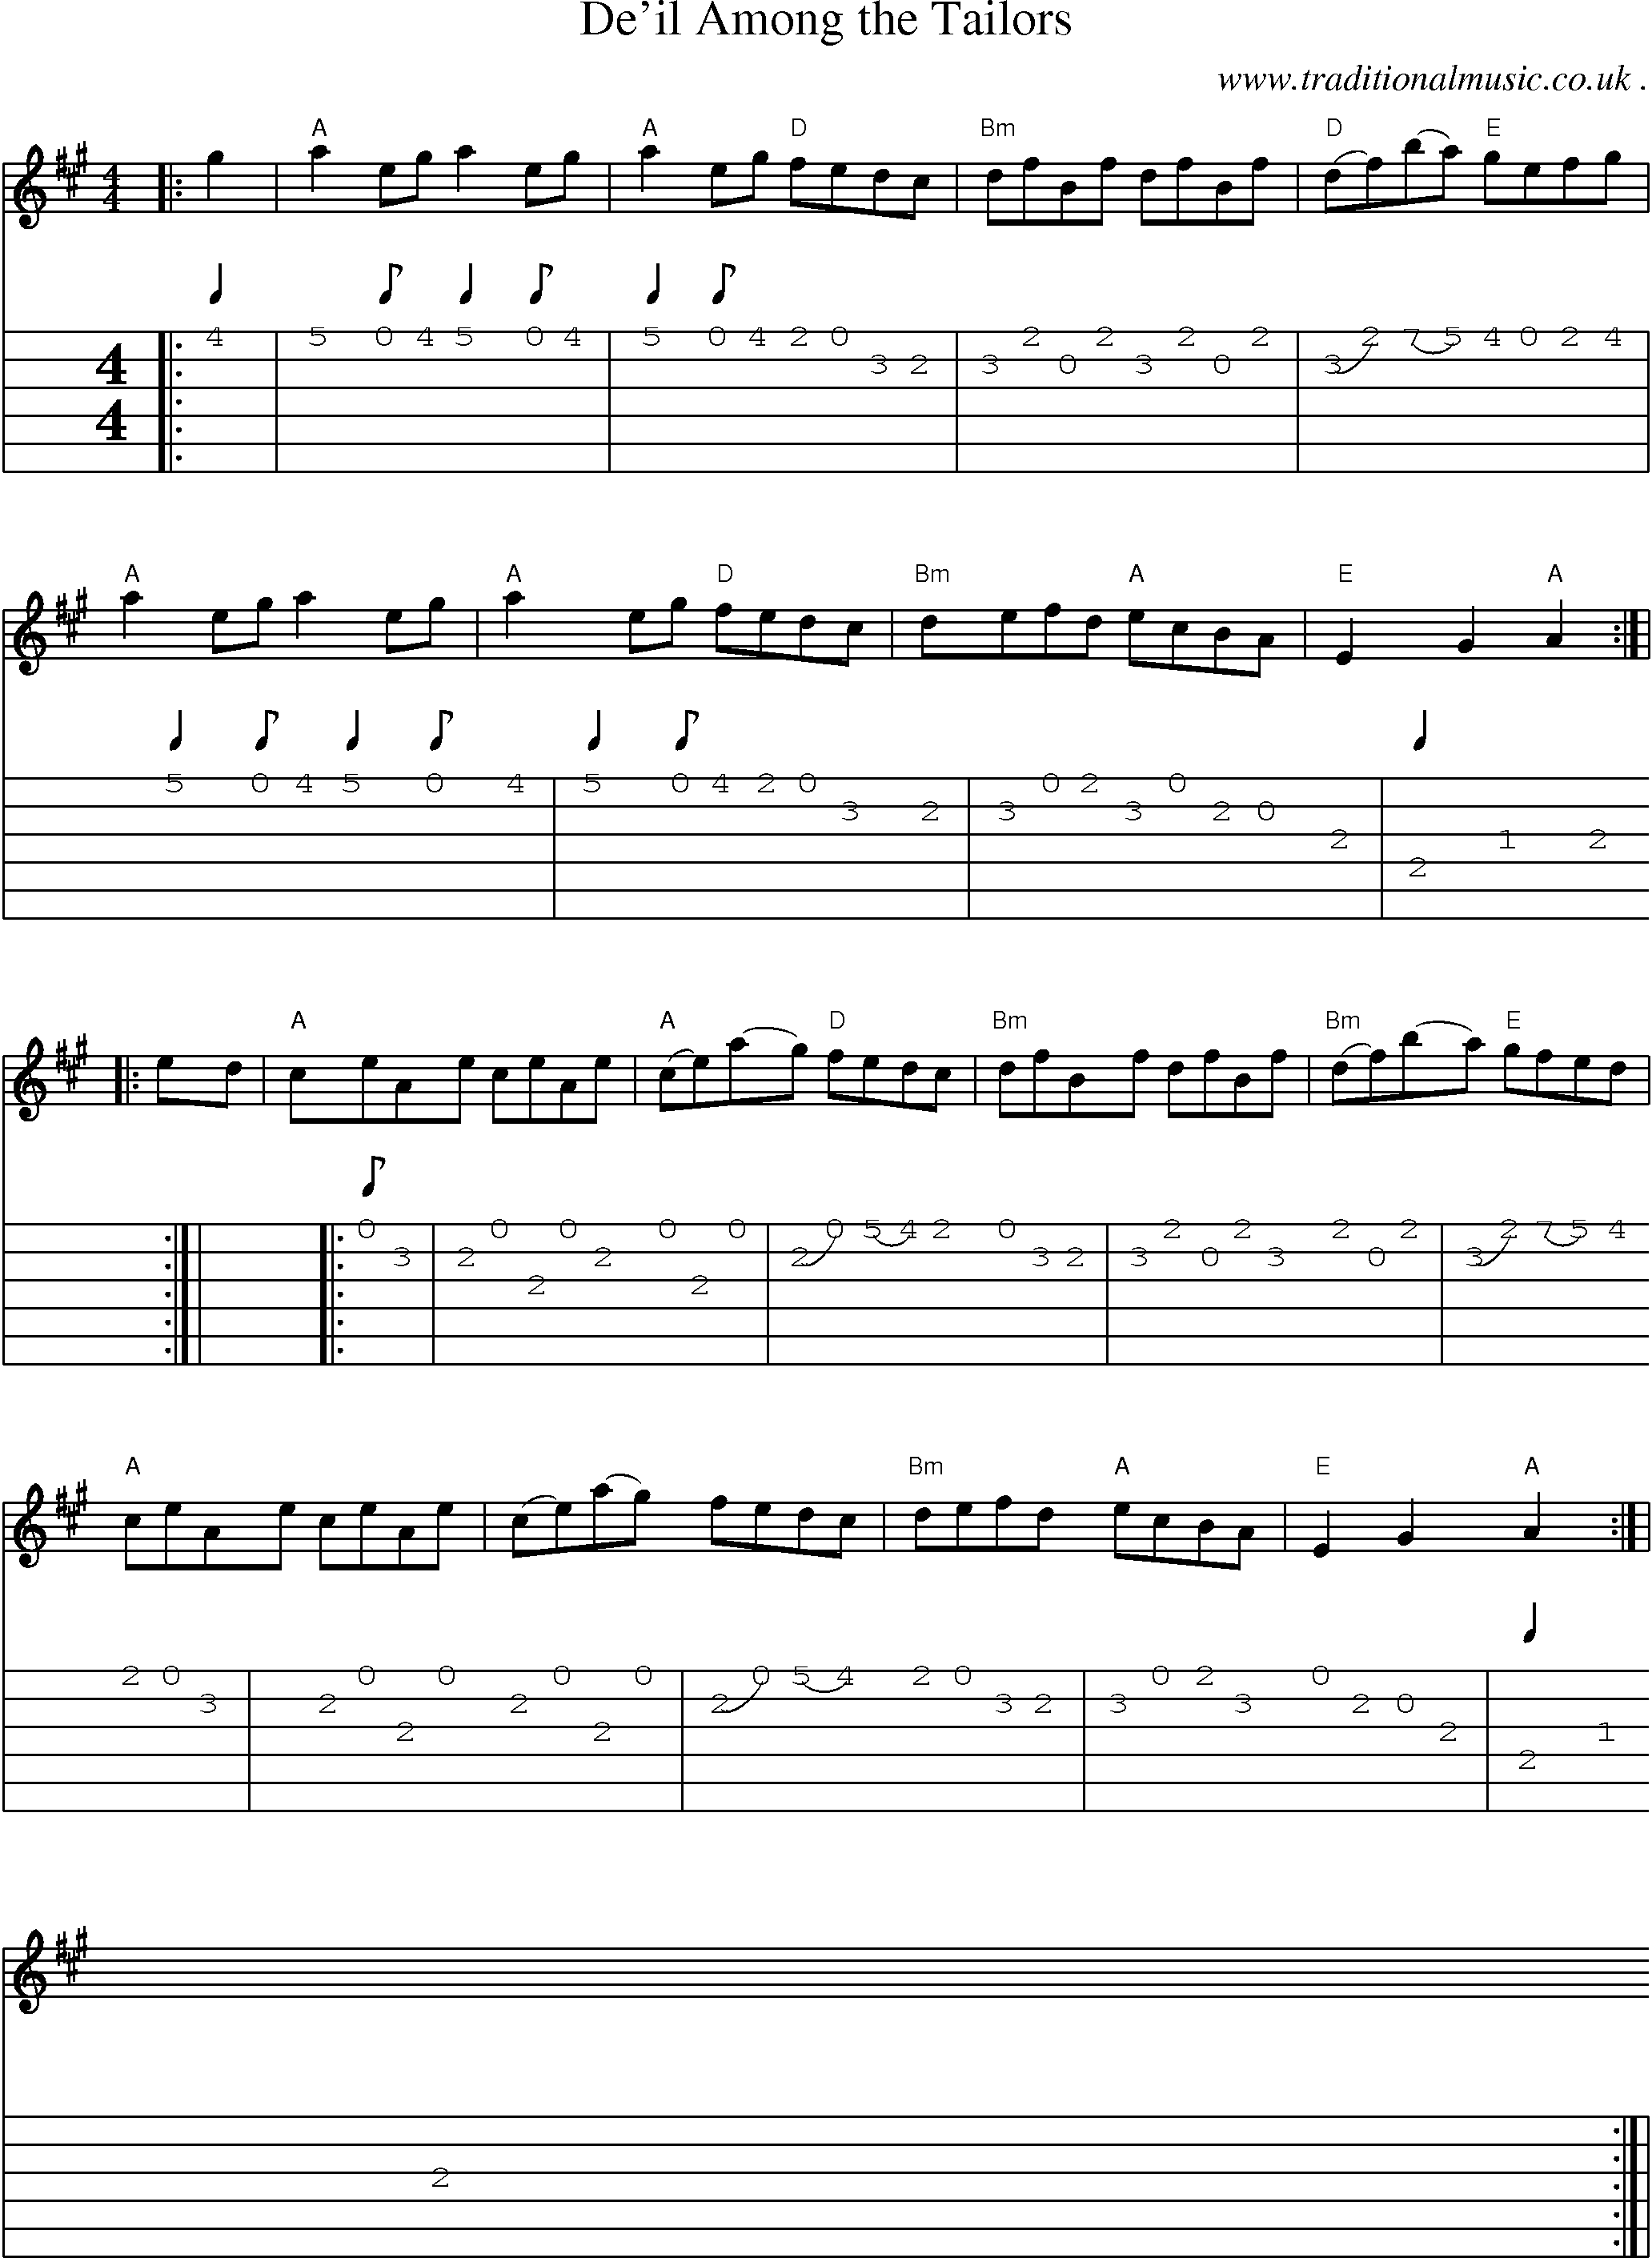 Sheet-music  score, Chords and Guitar Tabs for Deil Among The Tailors